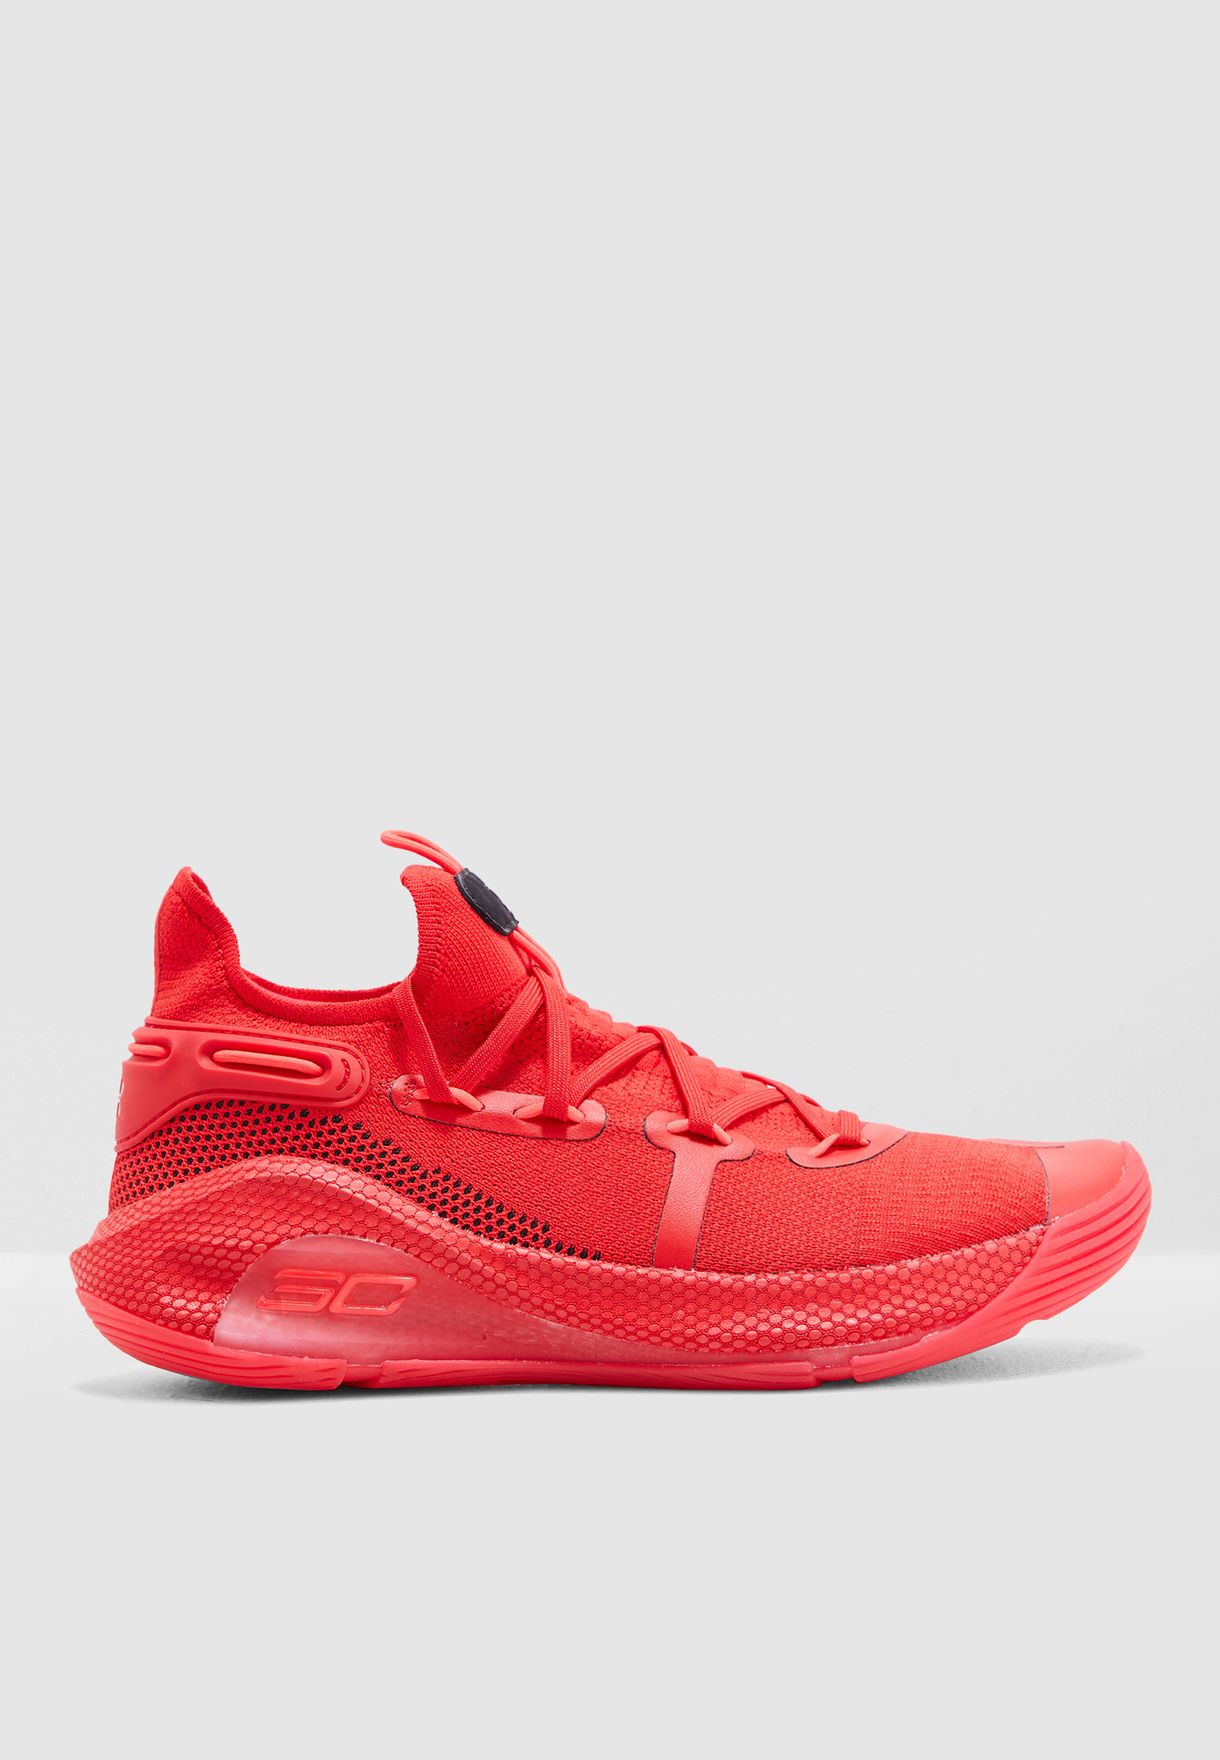 curry 6 cost